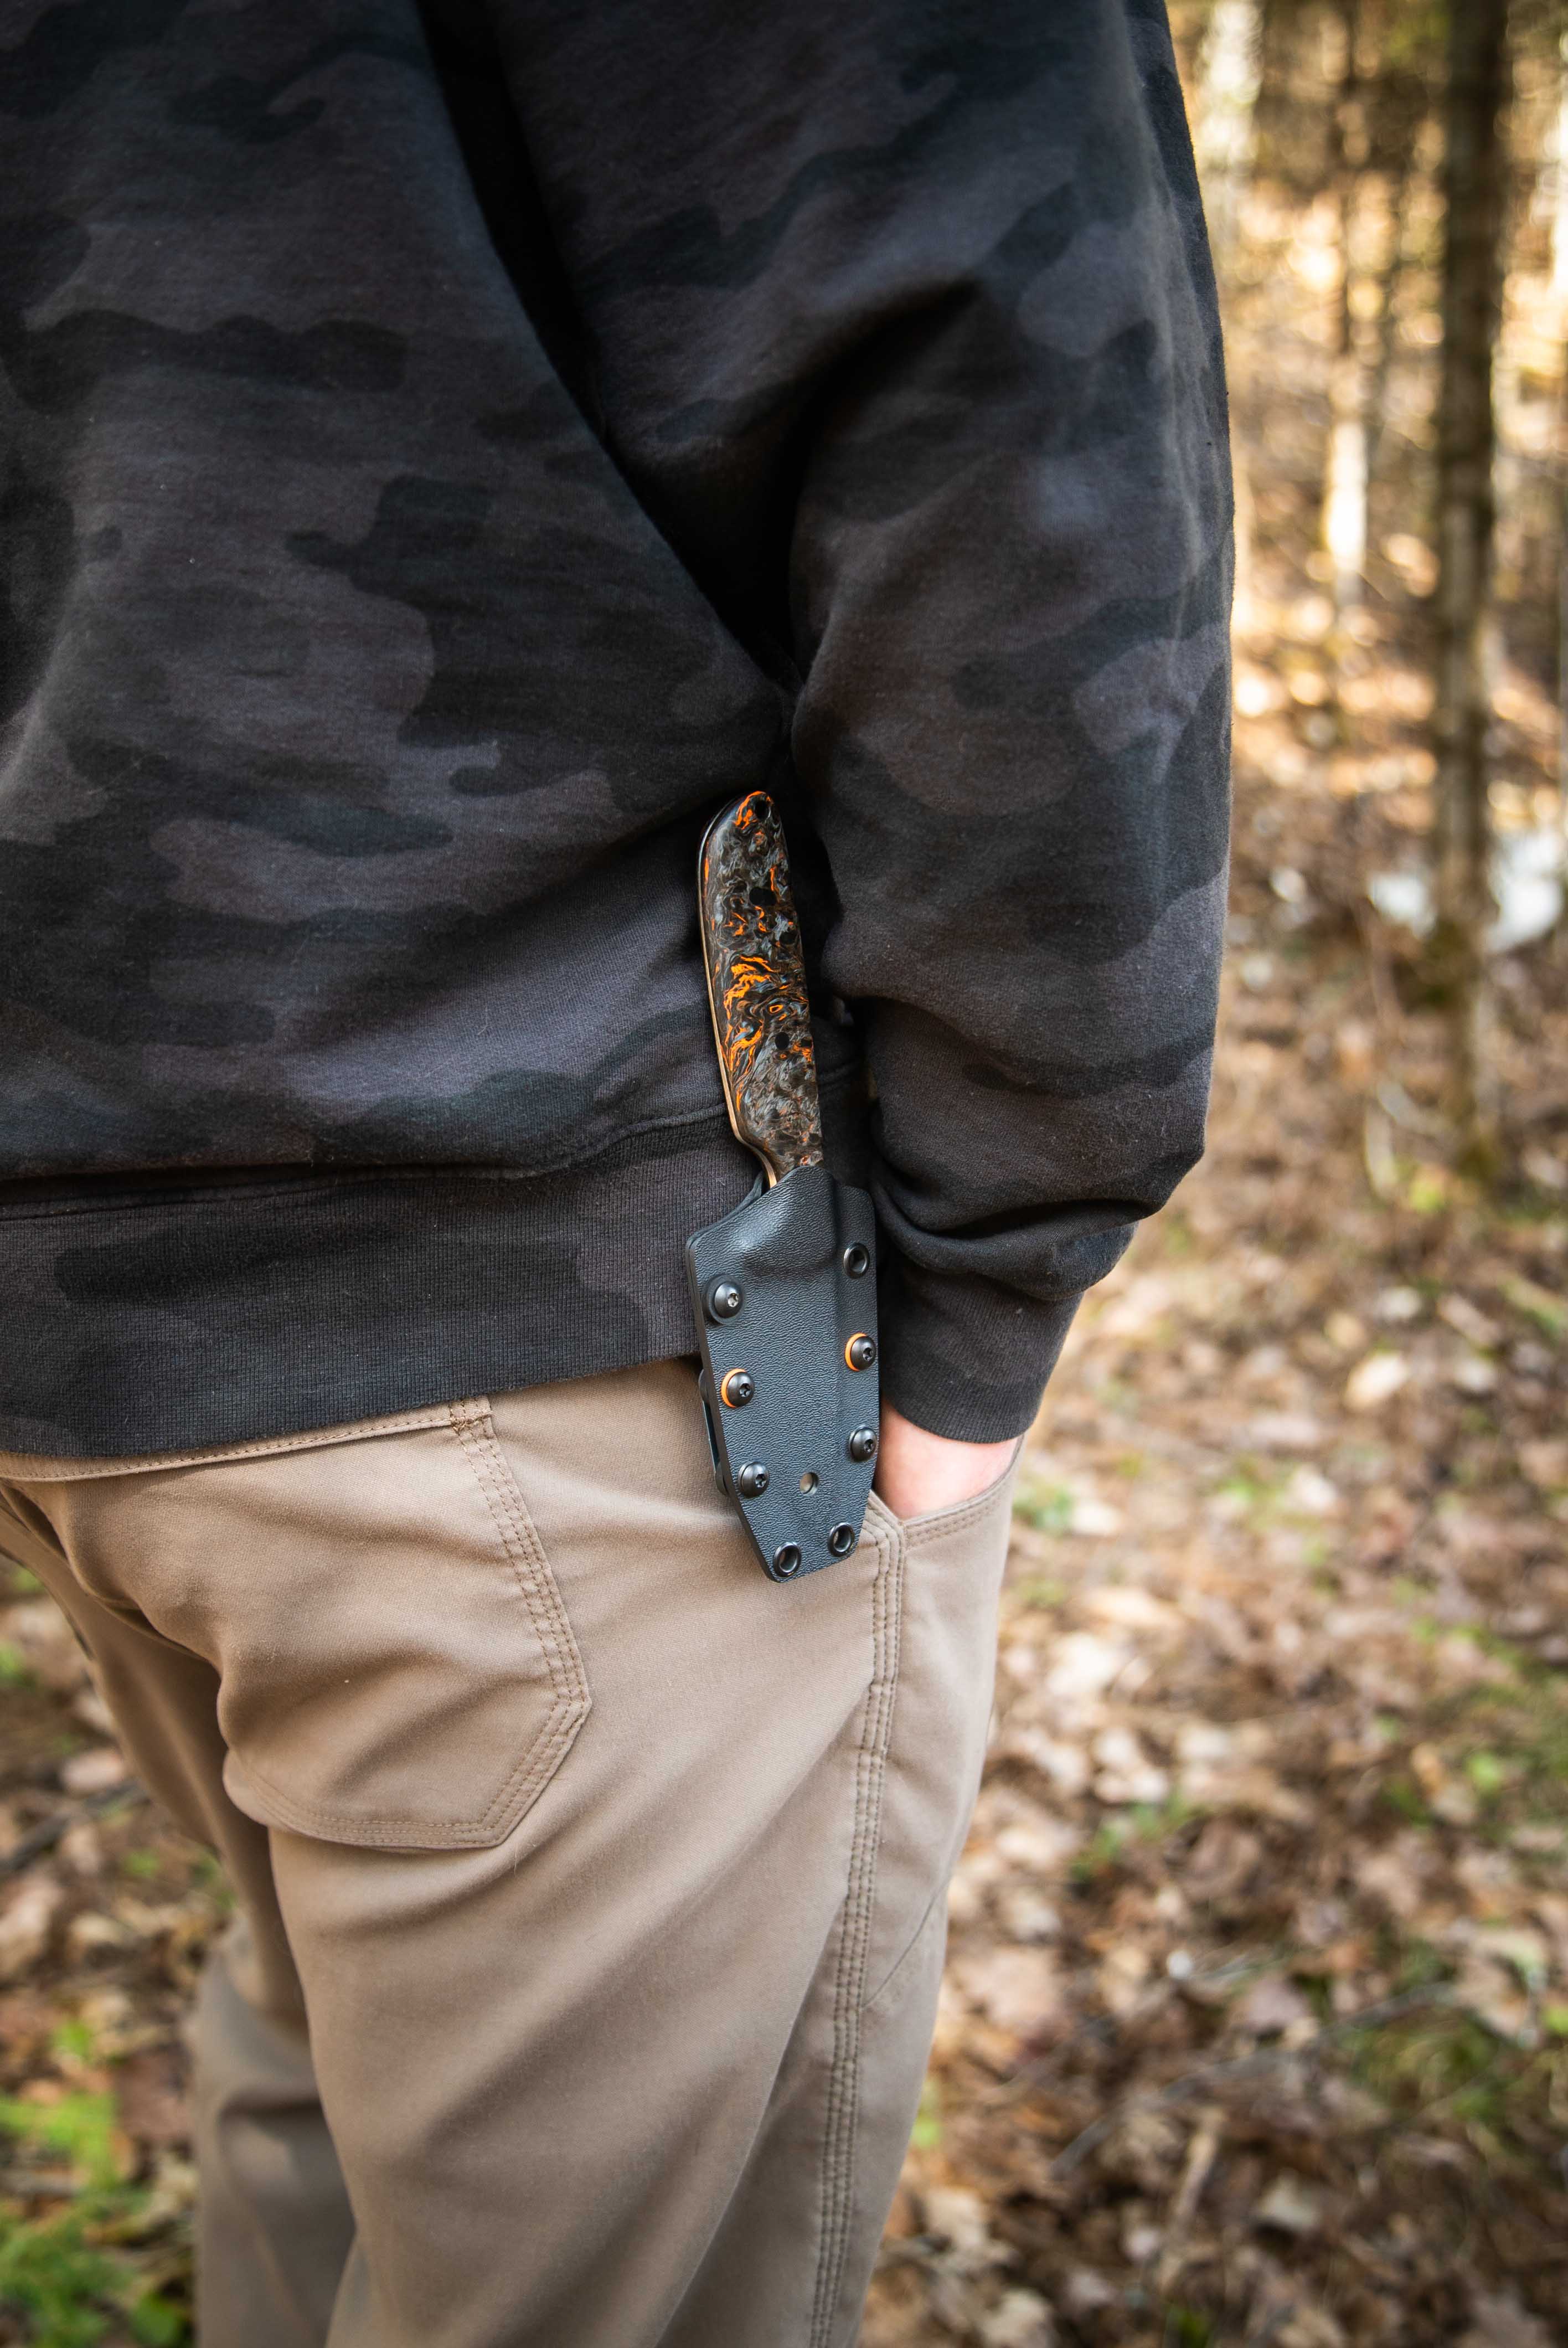 Belt Clip - Fits All Weather Tracker and River Knife Sheaths